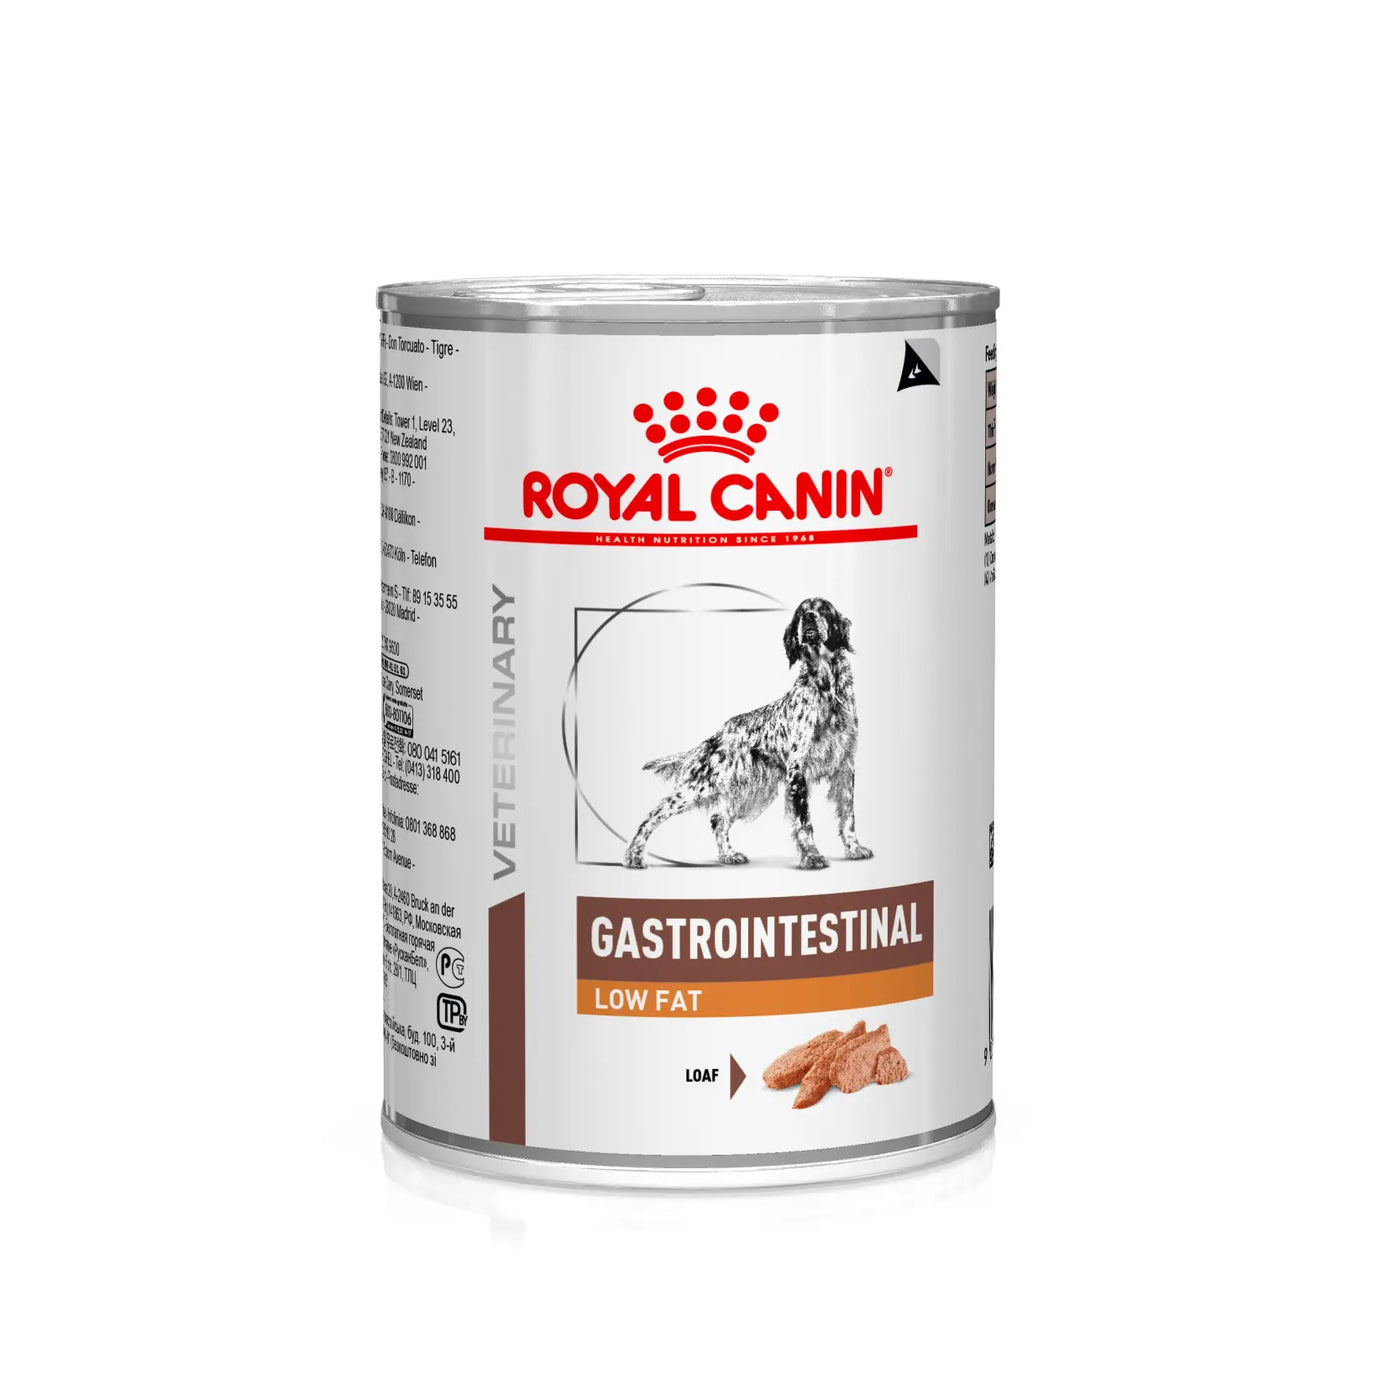 Royal Canin - Canine Gastro Intestinal Low Fat 410g